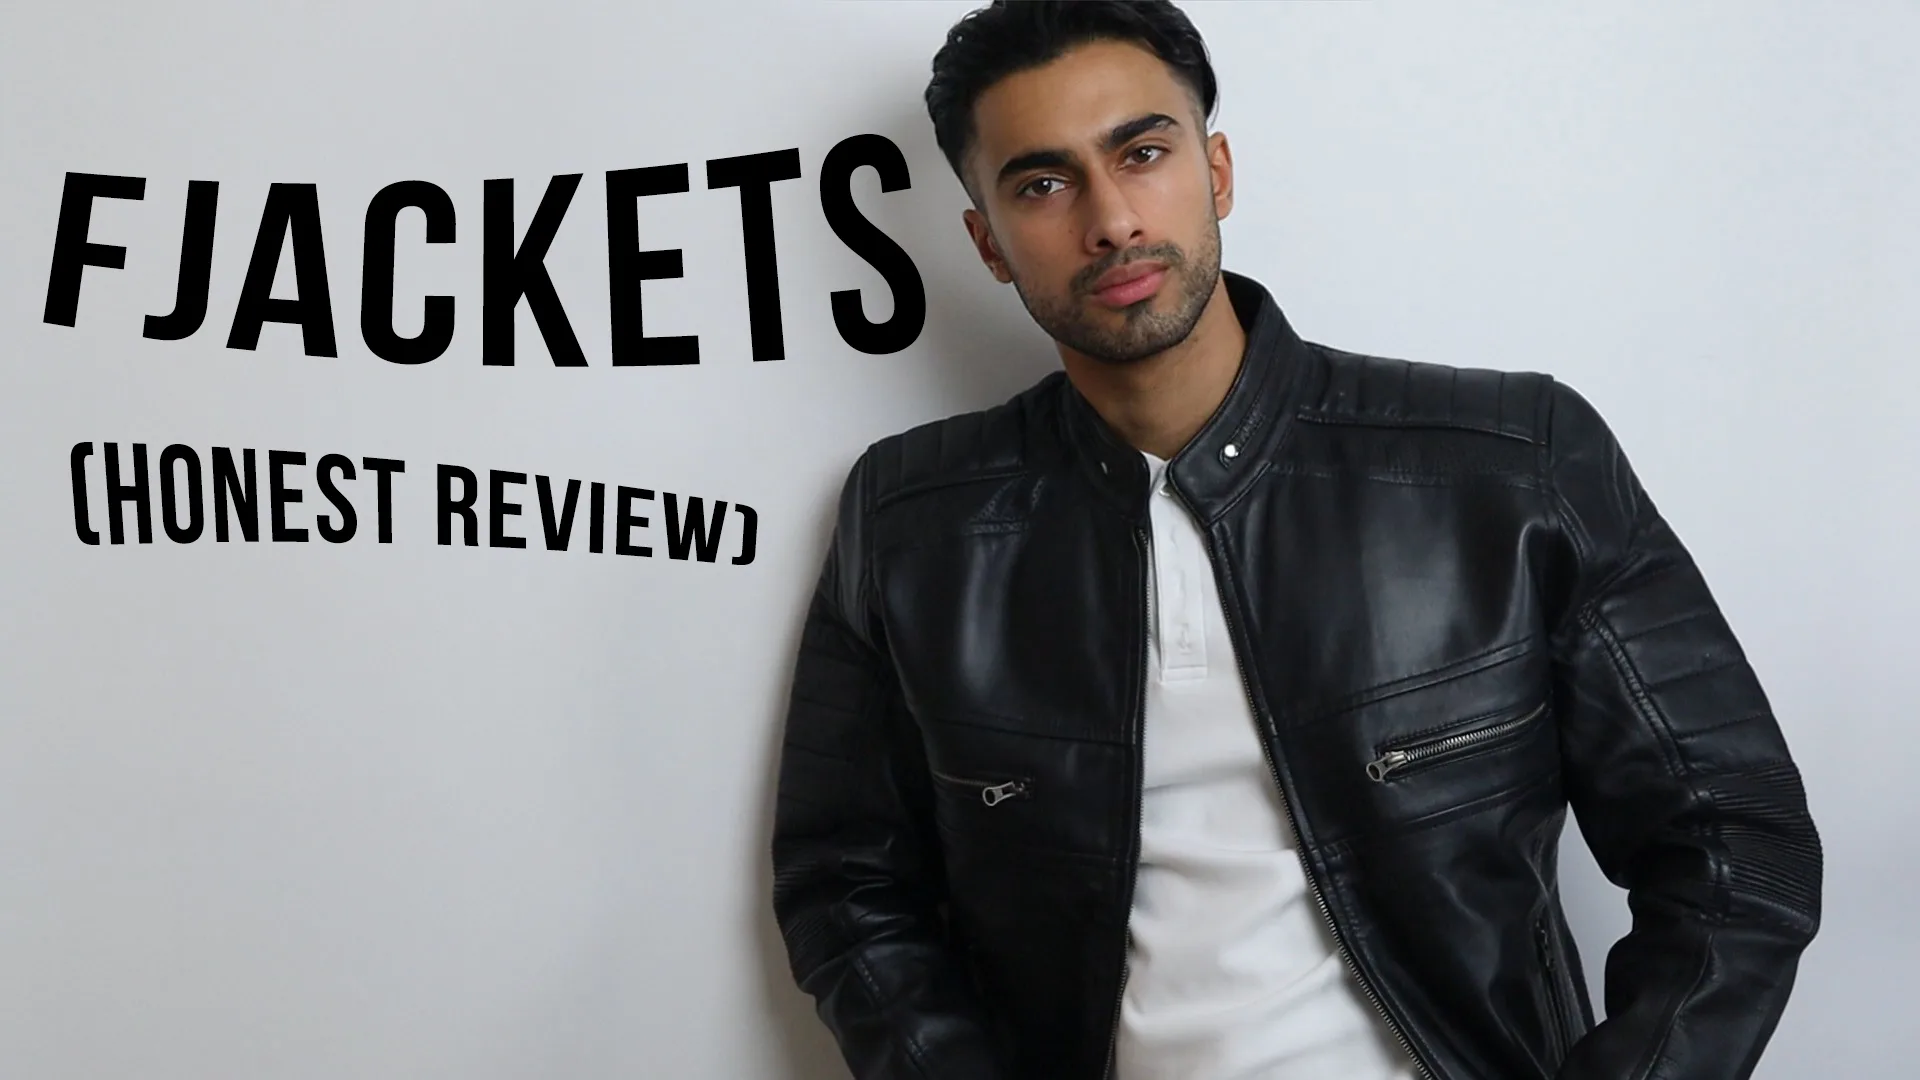 Fjackets (Honest Review) | Men’s Leather Jacket Haul & Try-On